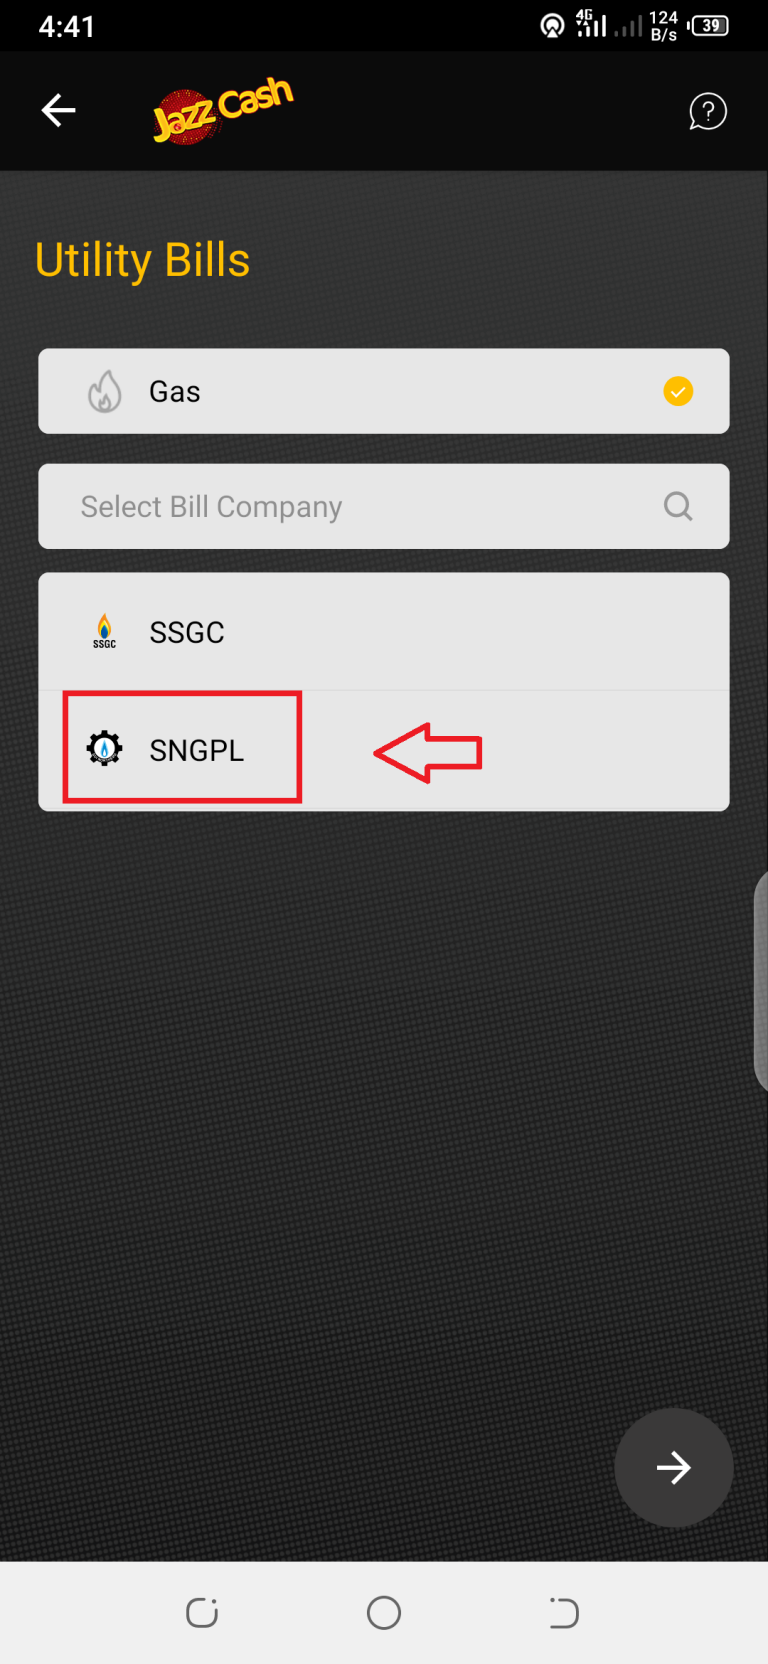 SNGPL Bill How to Check and Pay Online? Scholarly Writeups